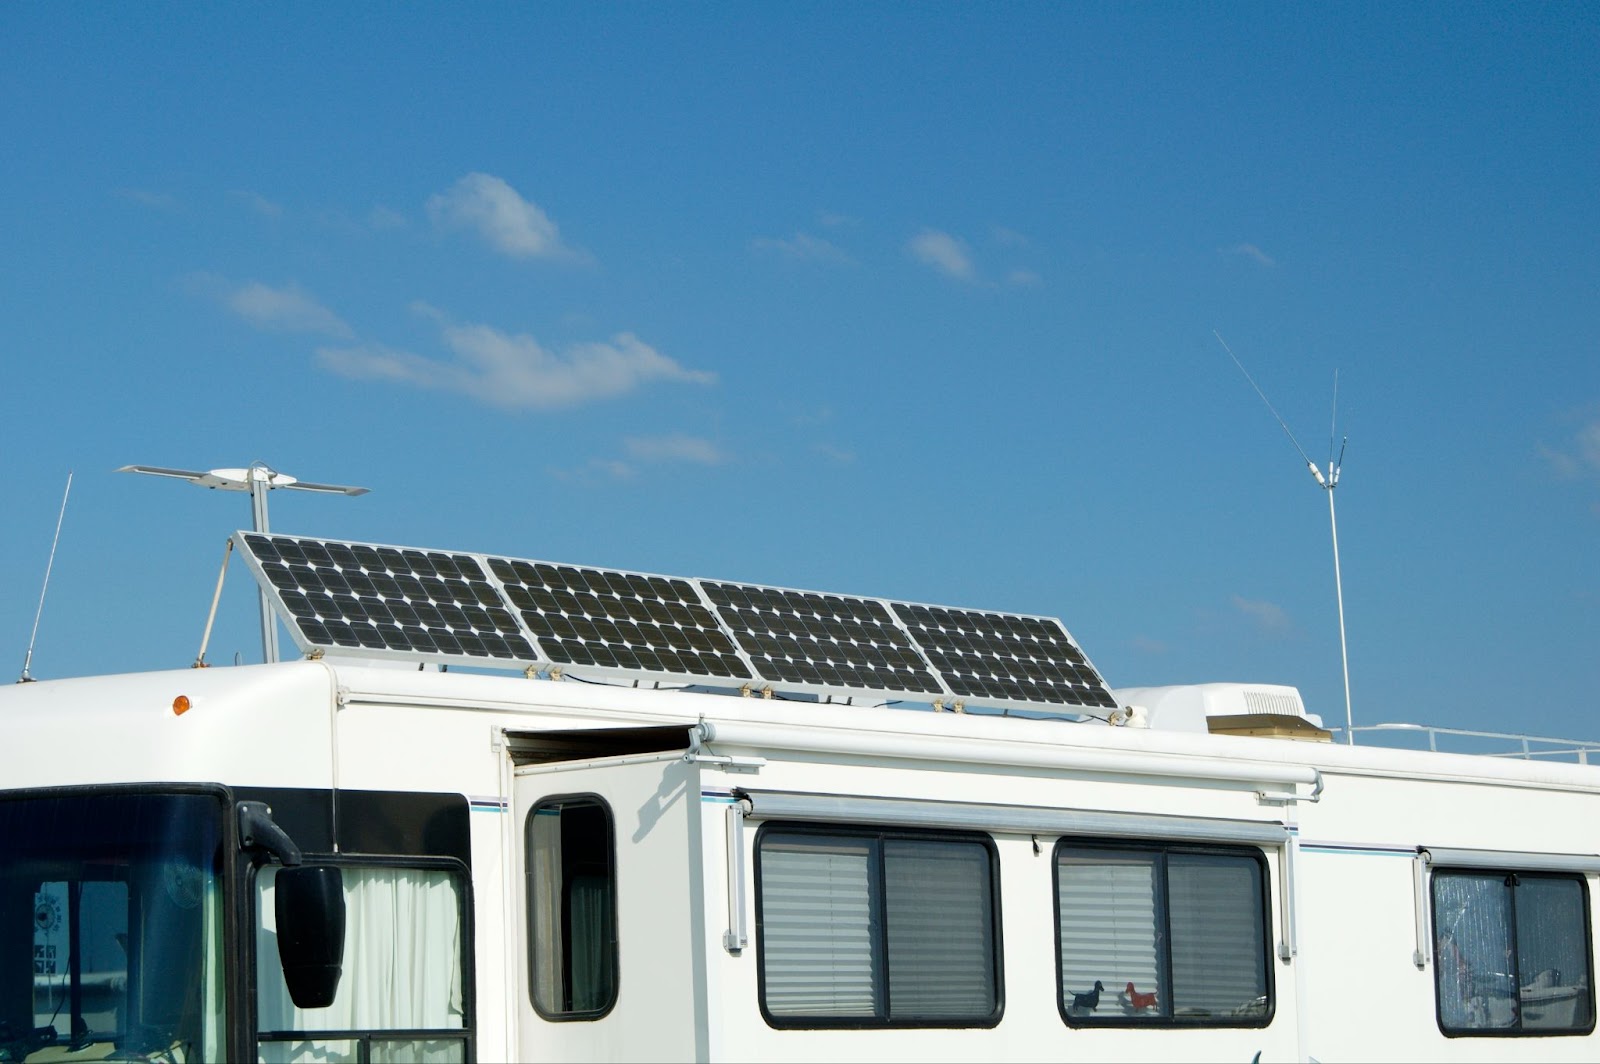 4 solar panels tilted on roof of RV